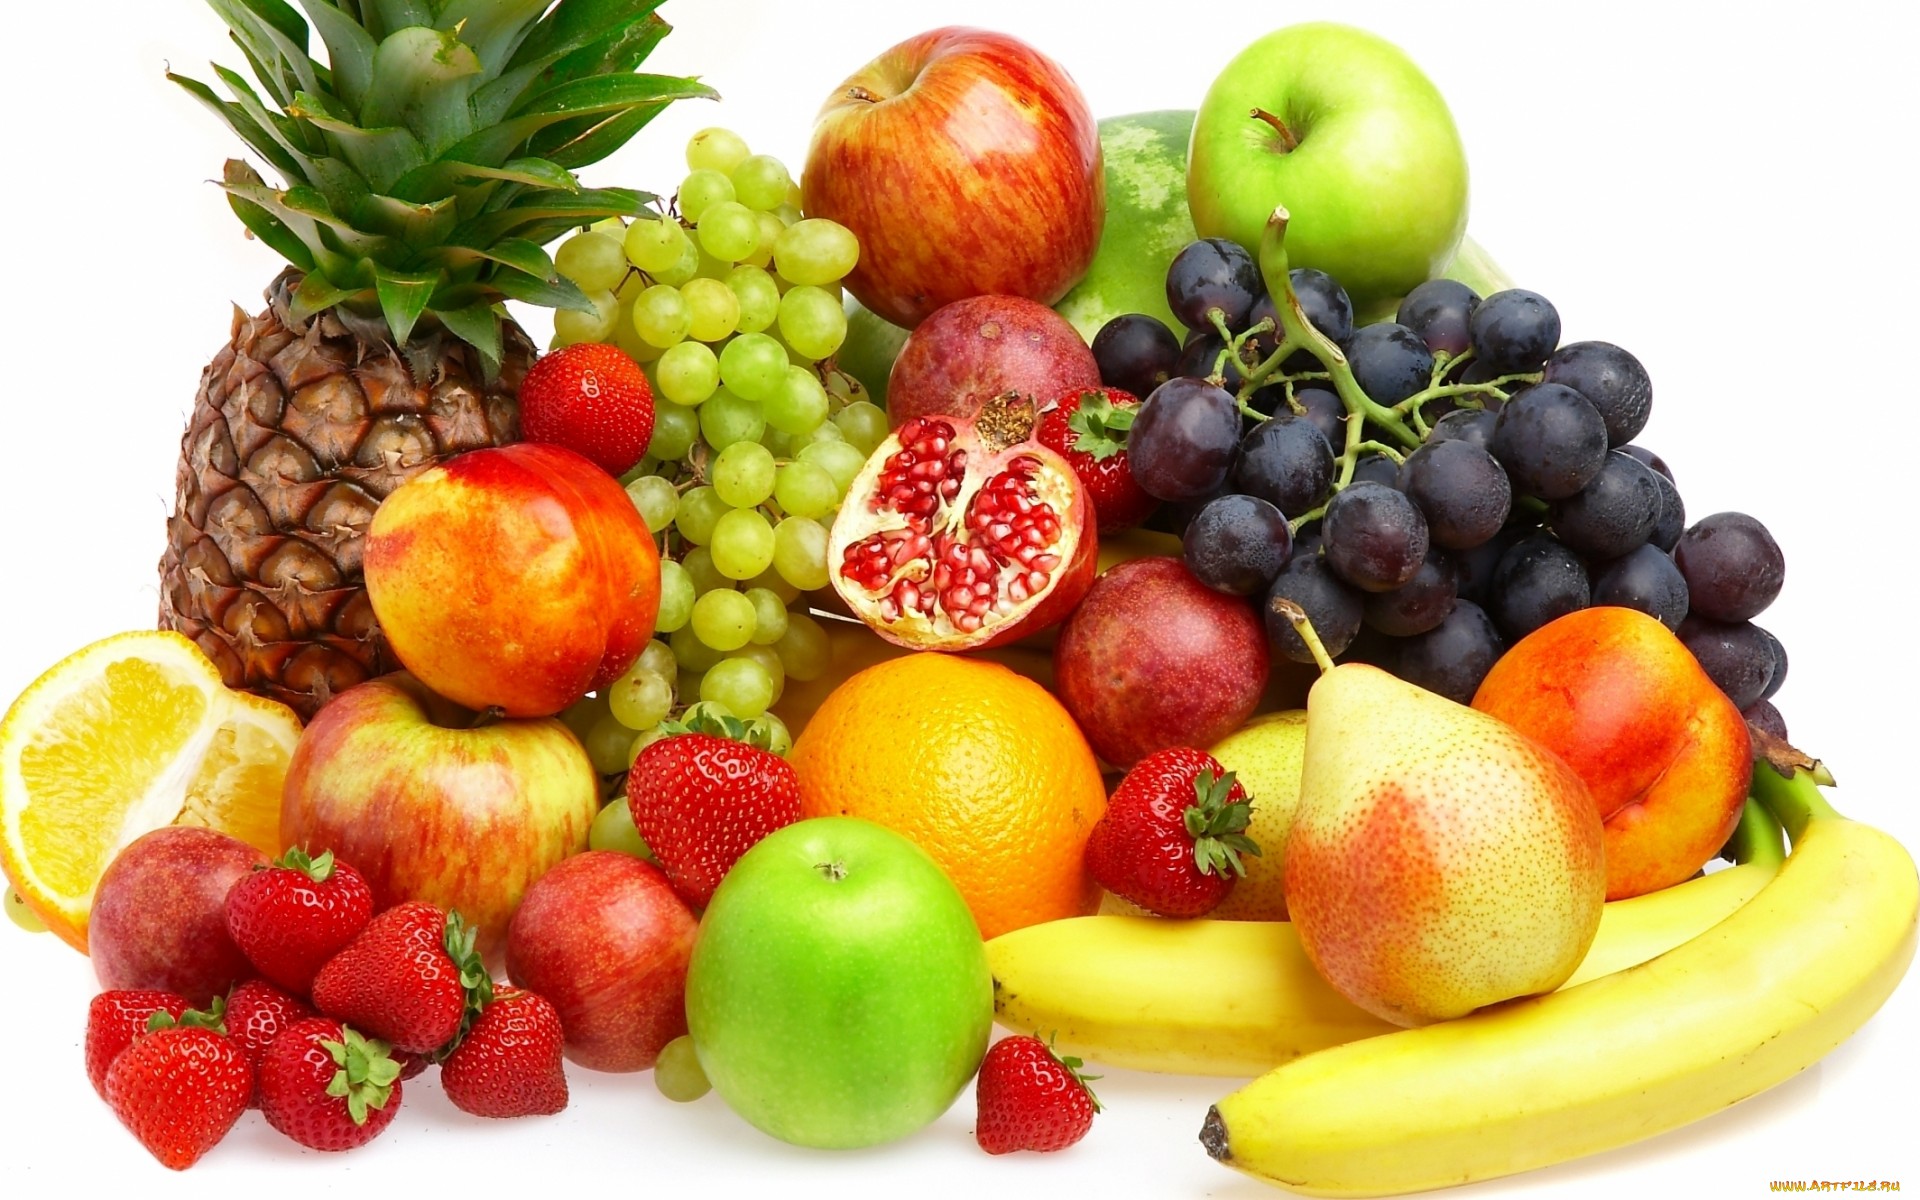 What fruits can be used to fight excess weight